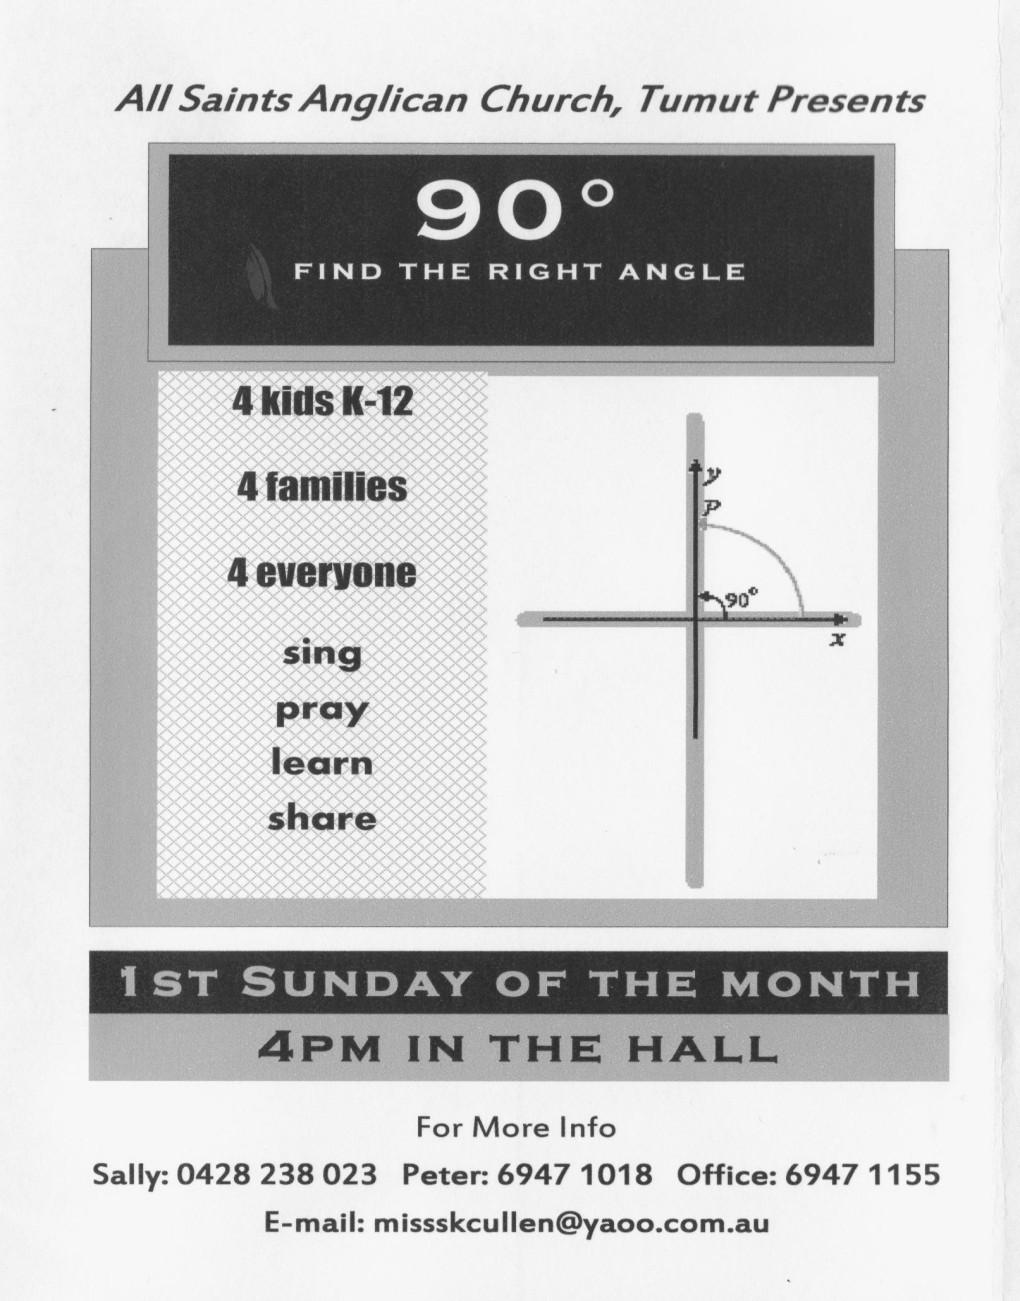 Something a bit different is happening in the hall on the first Sunday of the month. You are invited to join us as we sing, pray, learn and share.